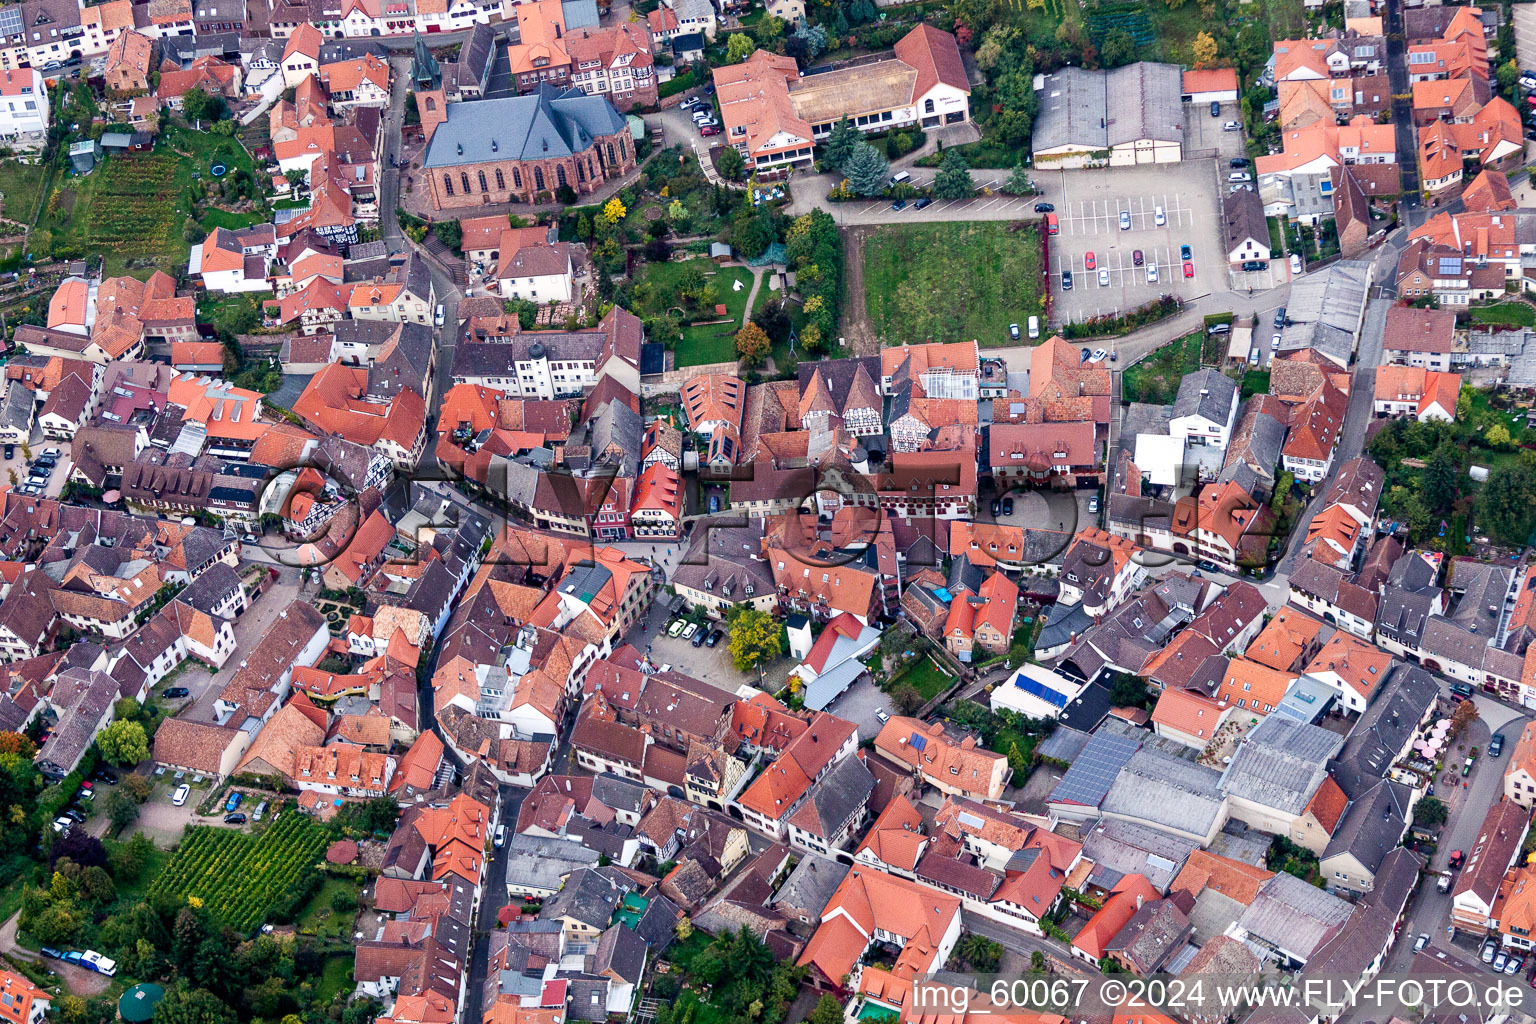 Aerial view of Old Town area and city center in Sankt Martin in the state Rhineland-Palatinate, Germany